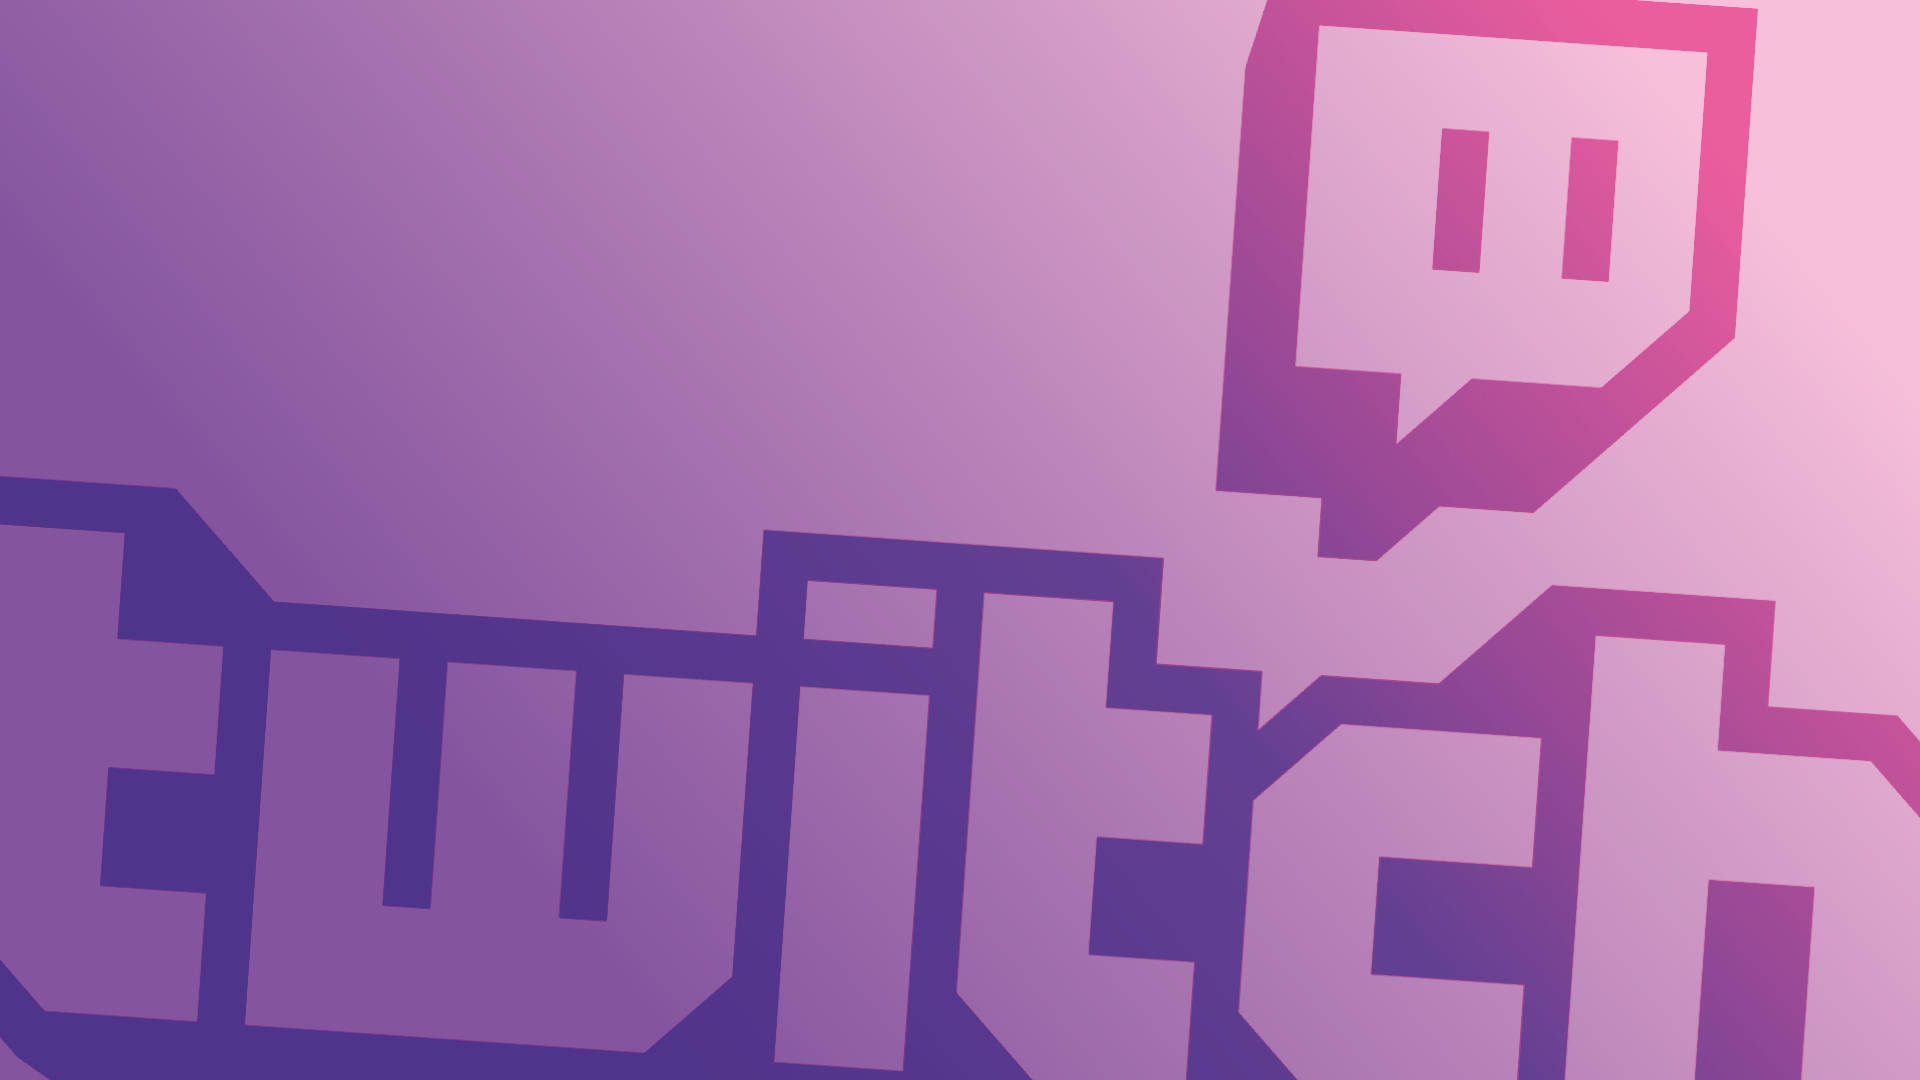 Free Twitch Wallpaper Downloads, [100+] Twitch Wallpapers for FREE |  